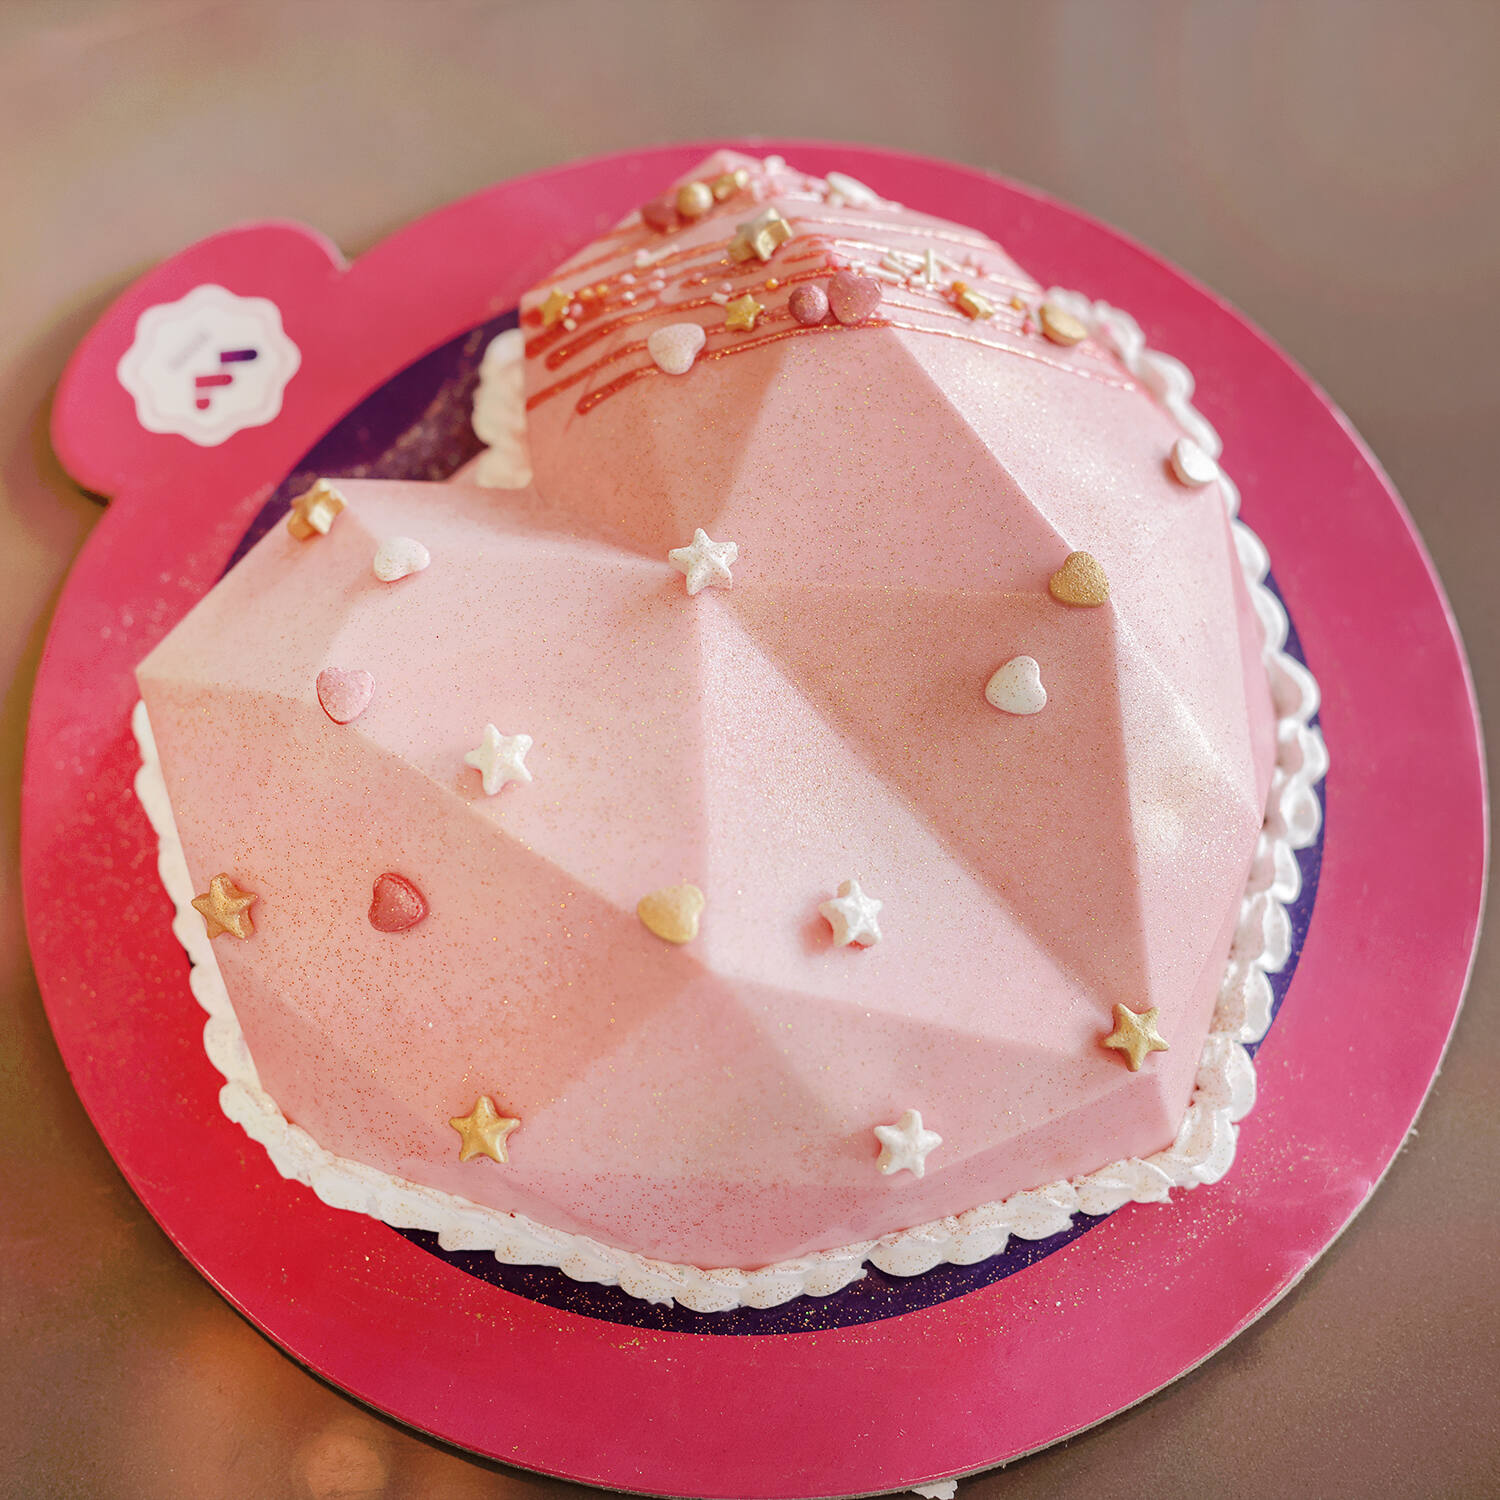 Order Eggless cakes | Online Eggless Cake Delivery - FNP